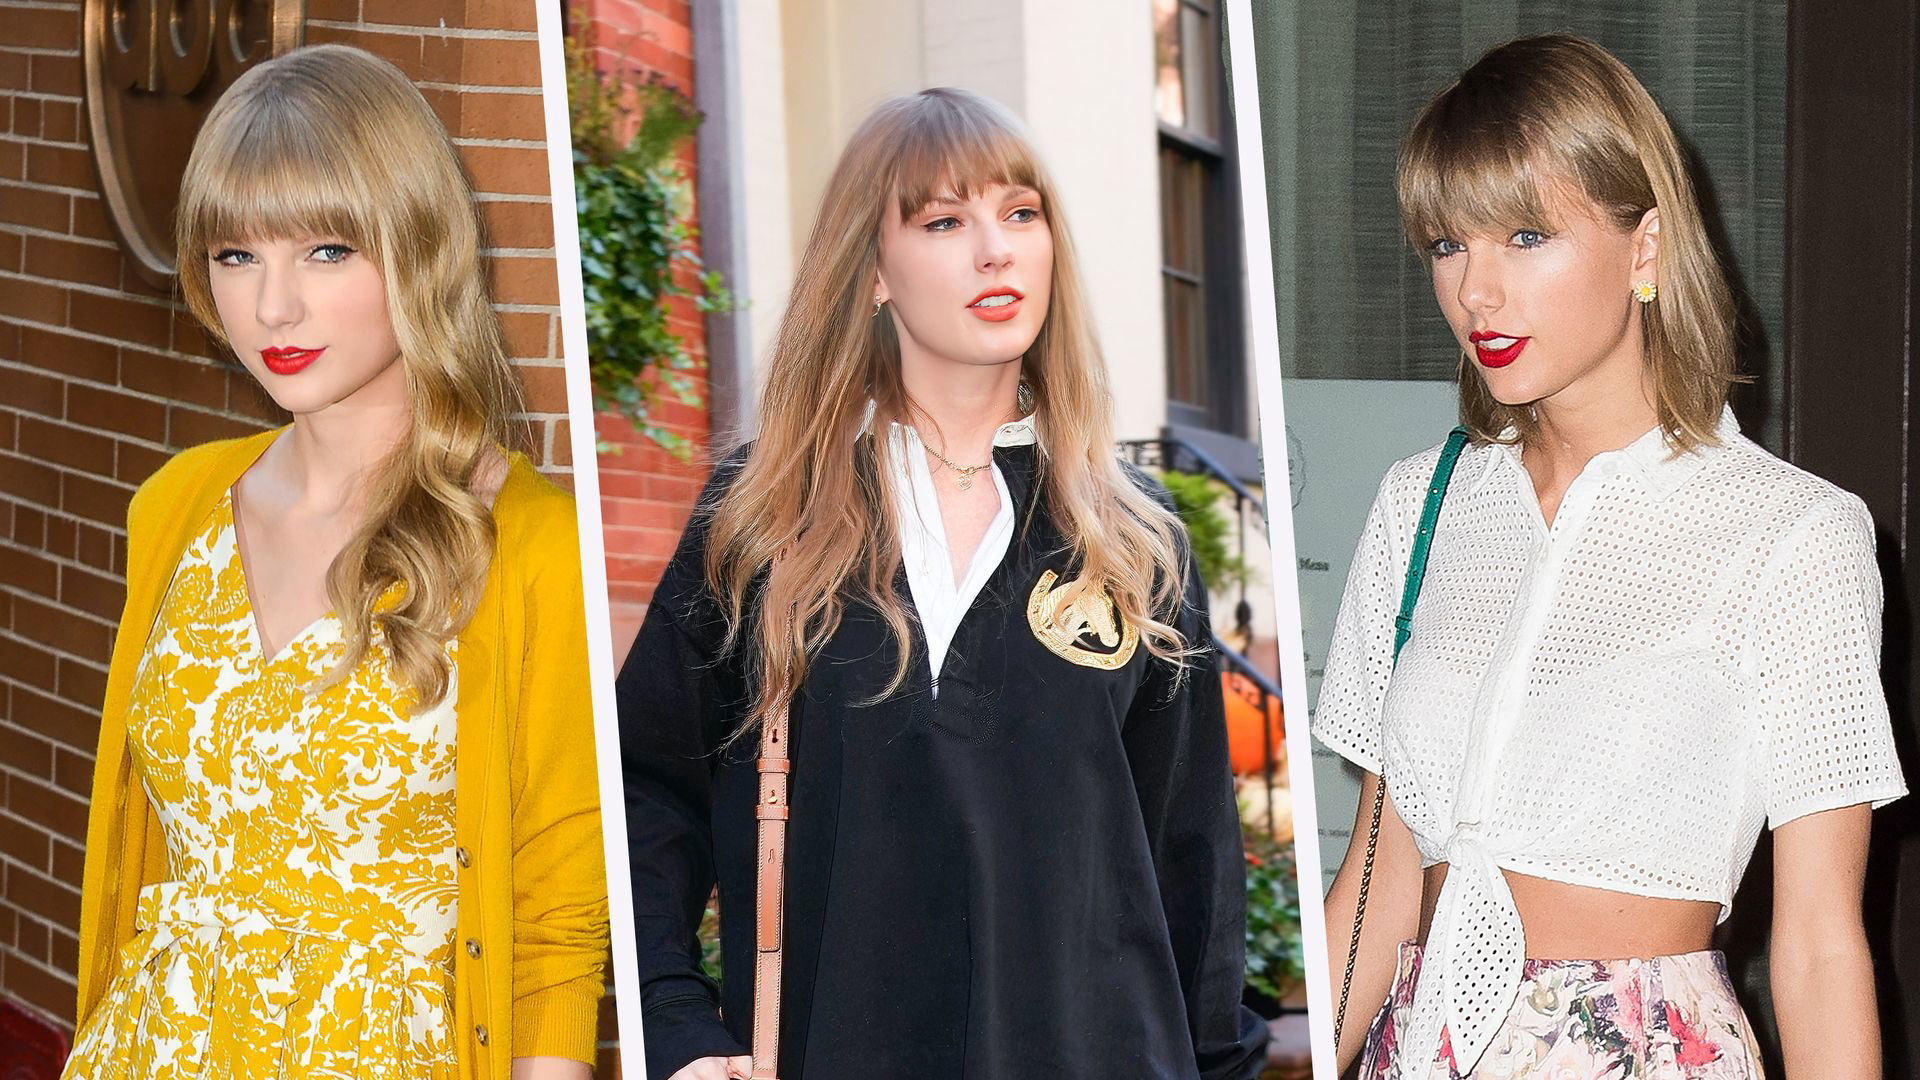 Exclusive: Inside the Instagram account making Taylor Swift's ...